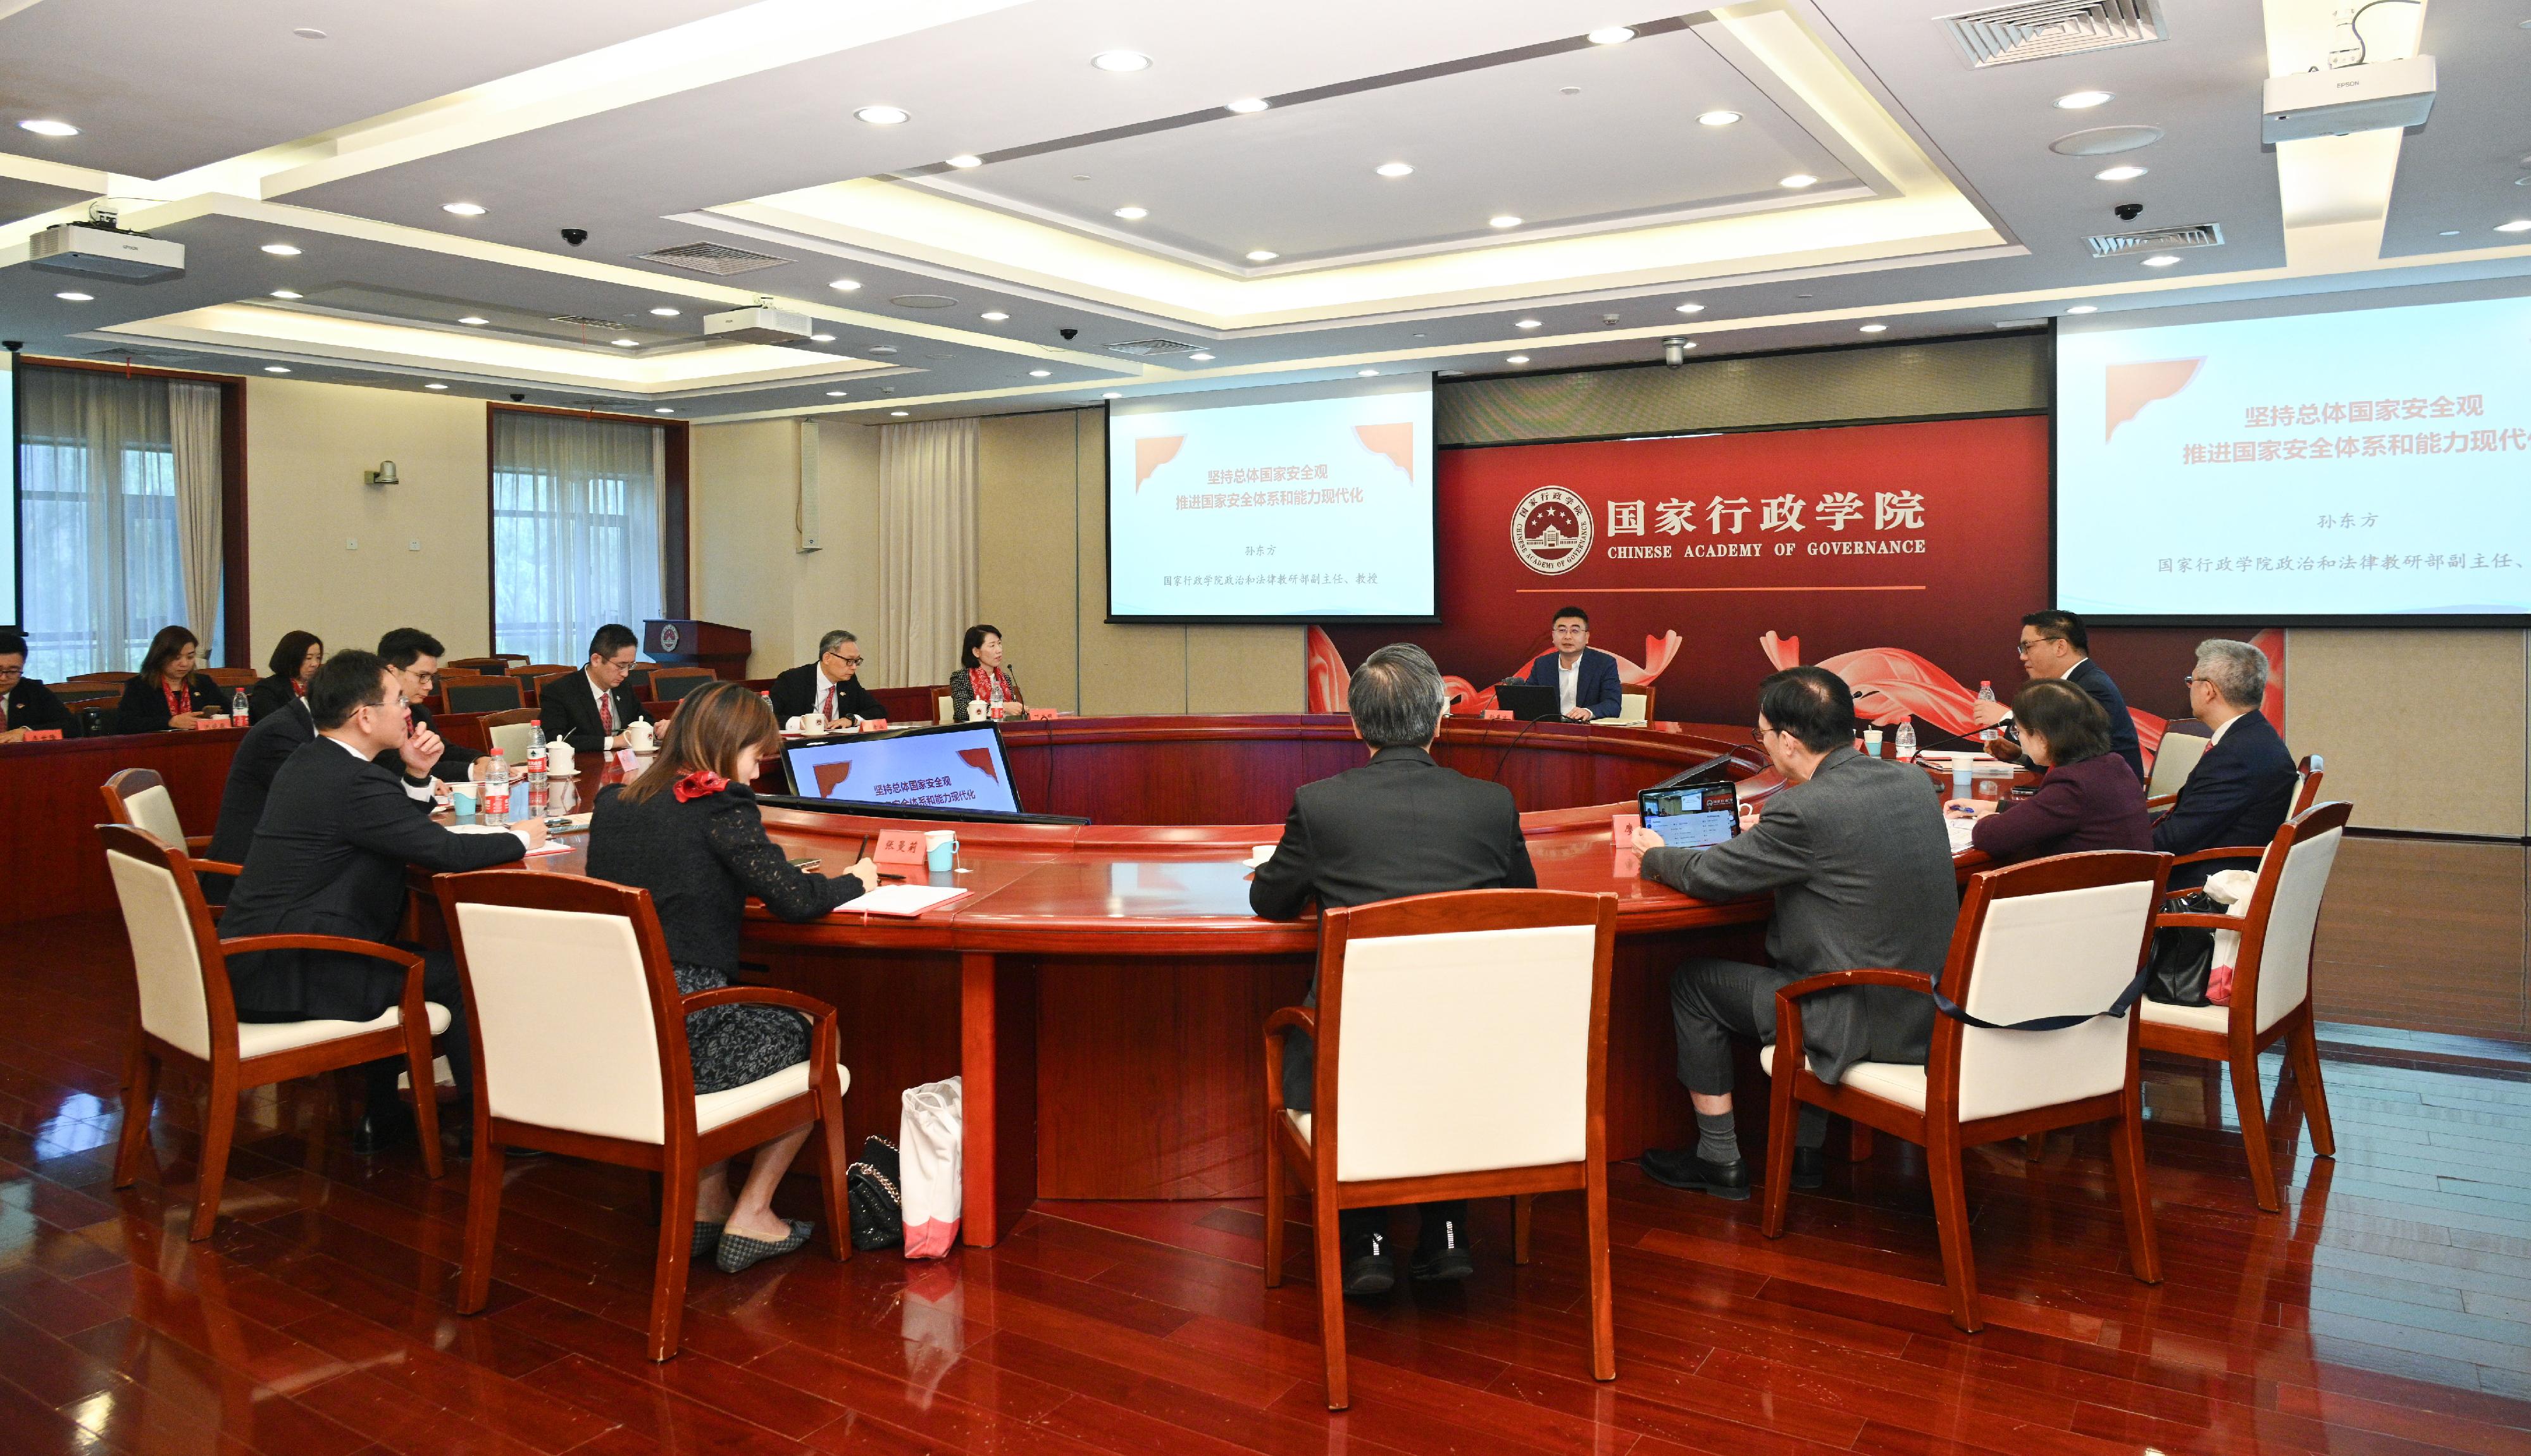 Deputy Director of the Department of Politics and Law Research at the National Academy of Governance Professor Sun Dongfang, yesterday (November 20) morning delivered a lecture to politically appointed officials on the holistic view of national security and the modernisation of the national security system and capabilities.
